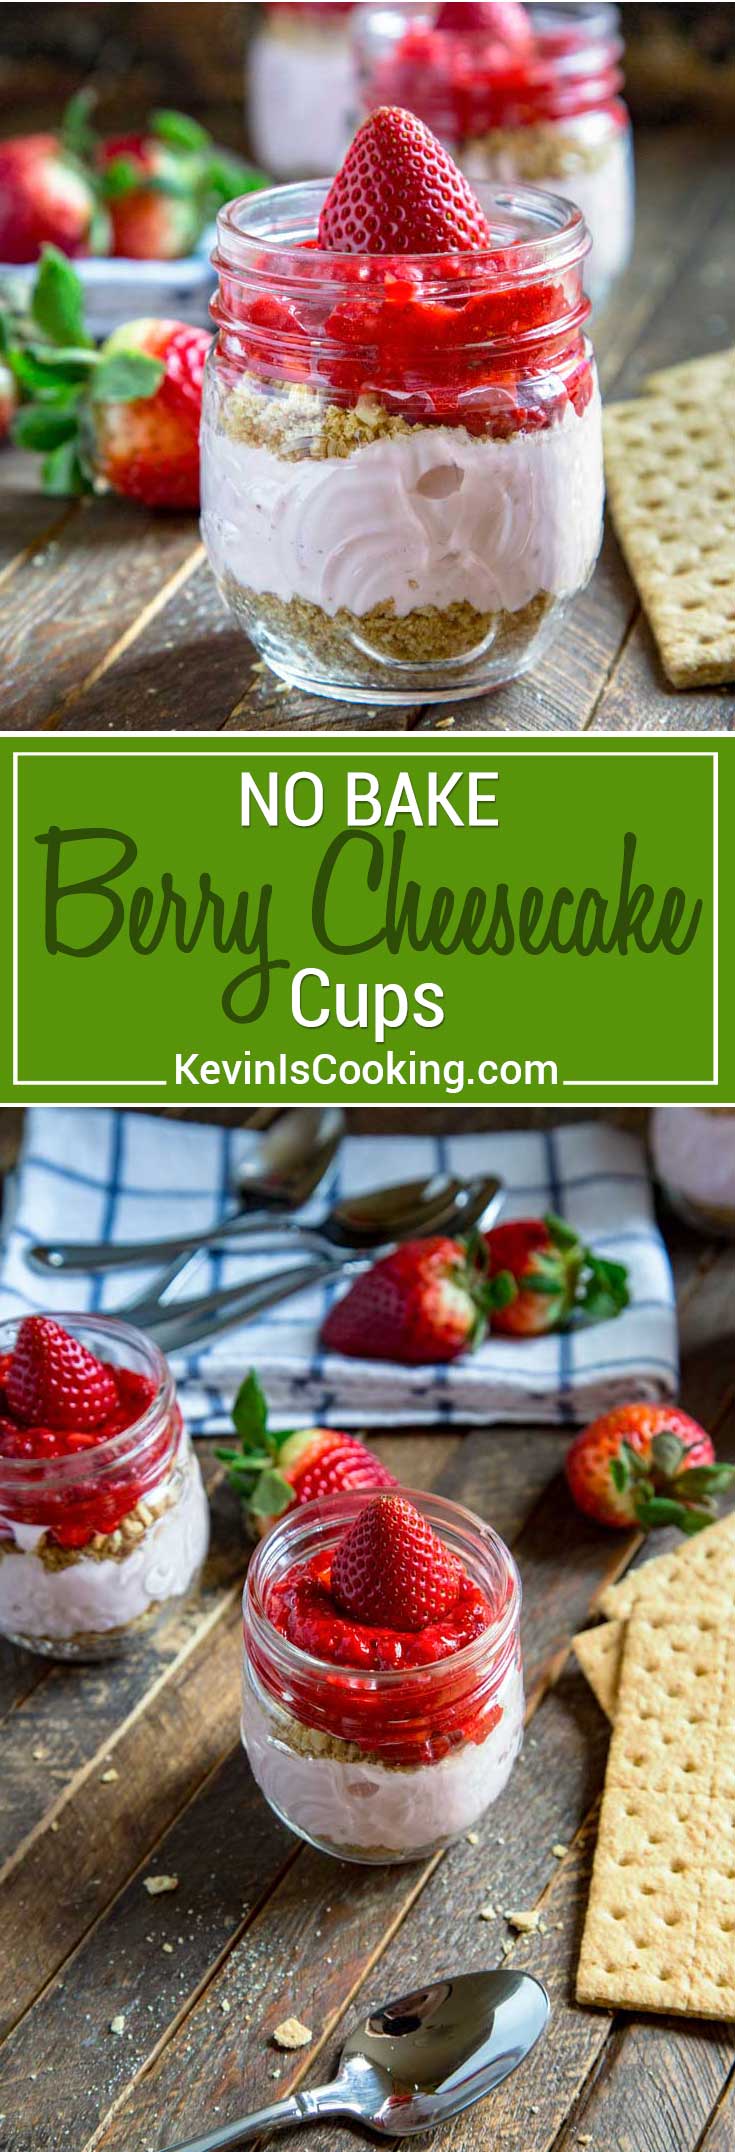 These No Bake Strawberry Cheesecake Cups are made with crushed graham crackers, cream cheese and Greek yogurt and fresh fruit. They're perfect for kids parties, the next office potluck or when that sweet tooth impulse strikes. Small, individual servings and no baking required!